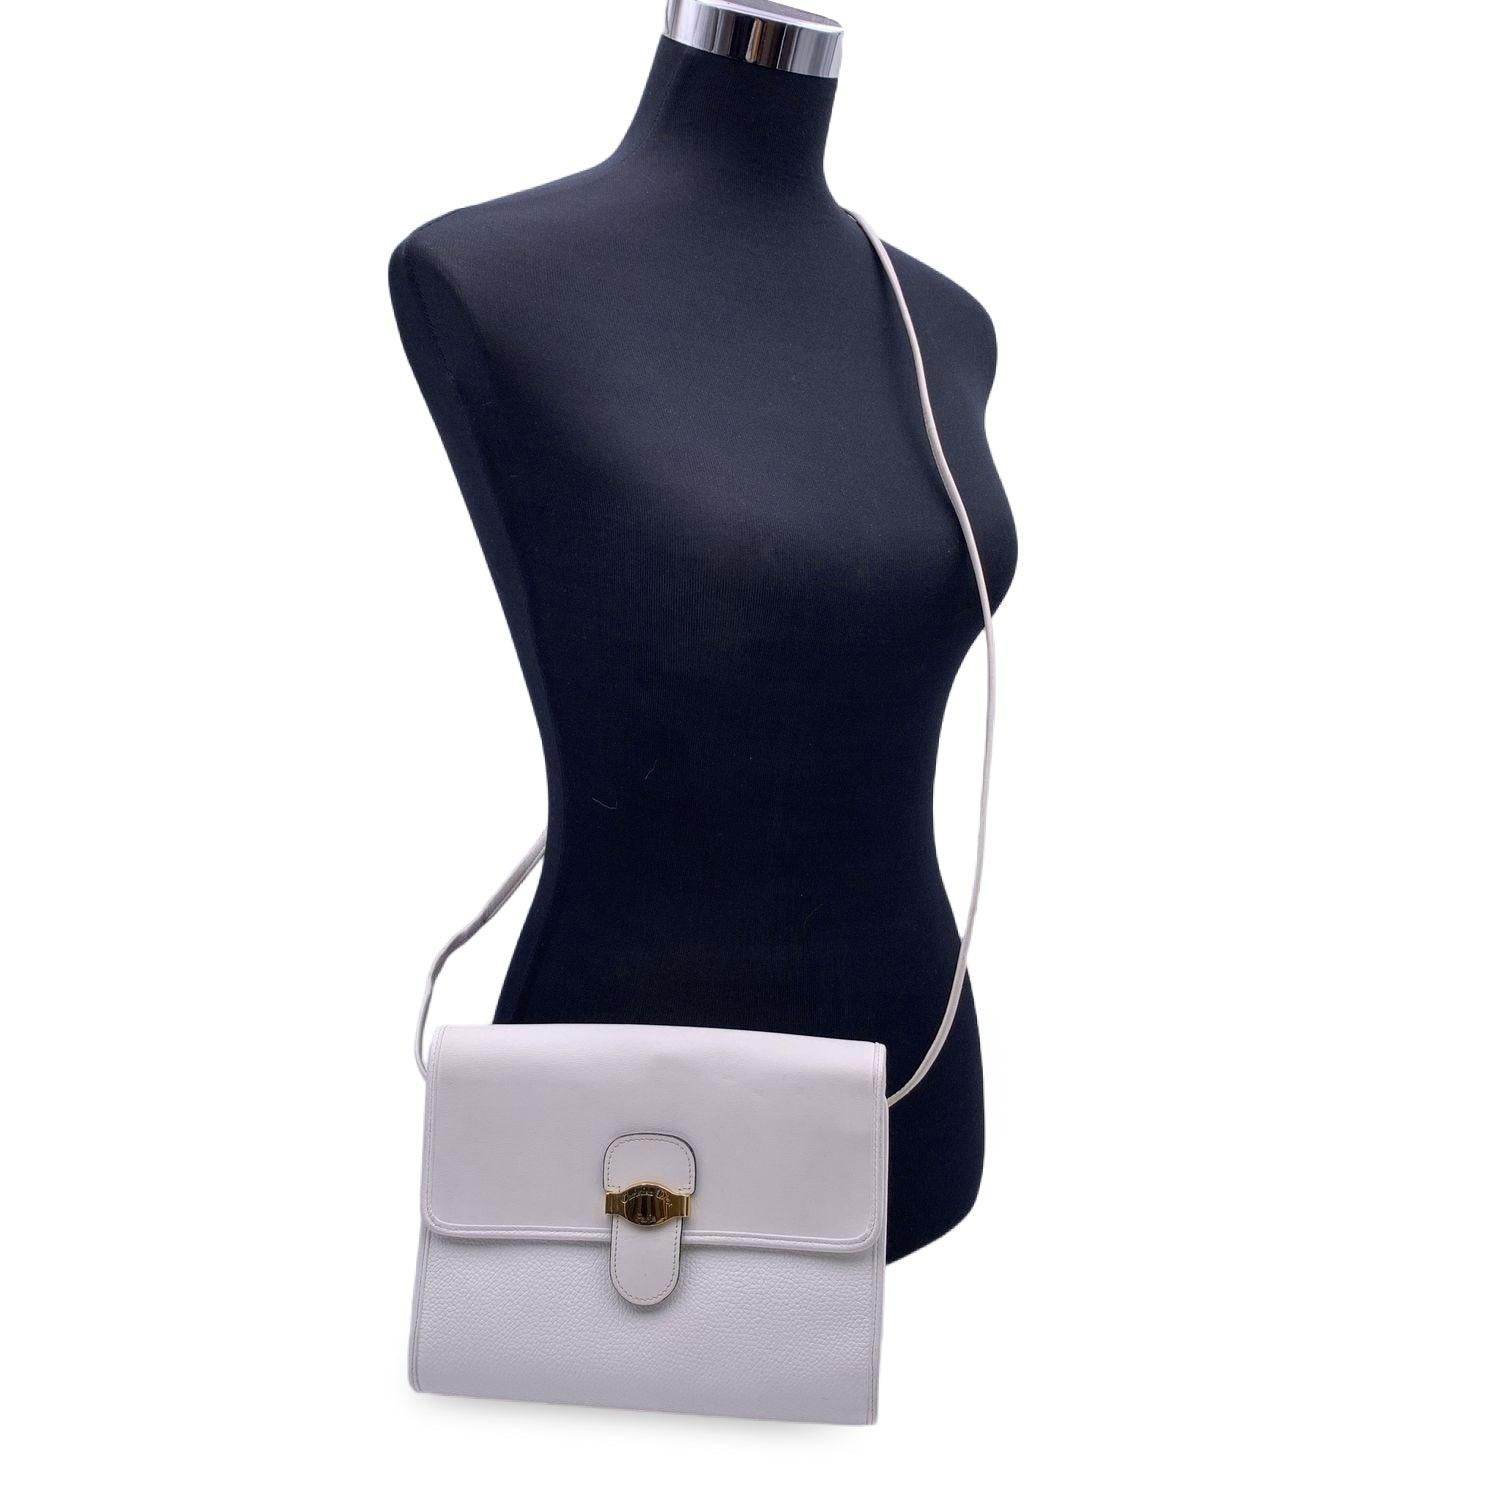 Vintage CHRISTIAN DIOR shoulder bag crafted in white leather. Flap with magnetic button closure. Gold metal 'Christian Dior Paris' logo tab on the front. 1 side open pocket inside. 'Christian Dior - Made in France' tag inside Condition A - EXCELLENT